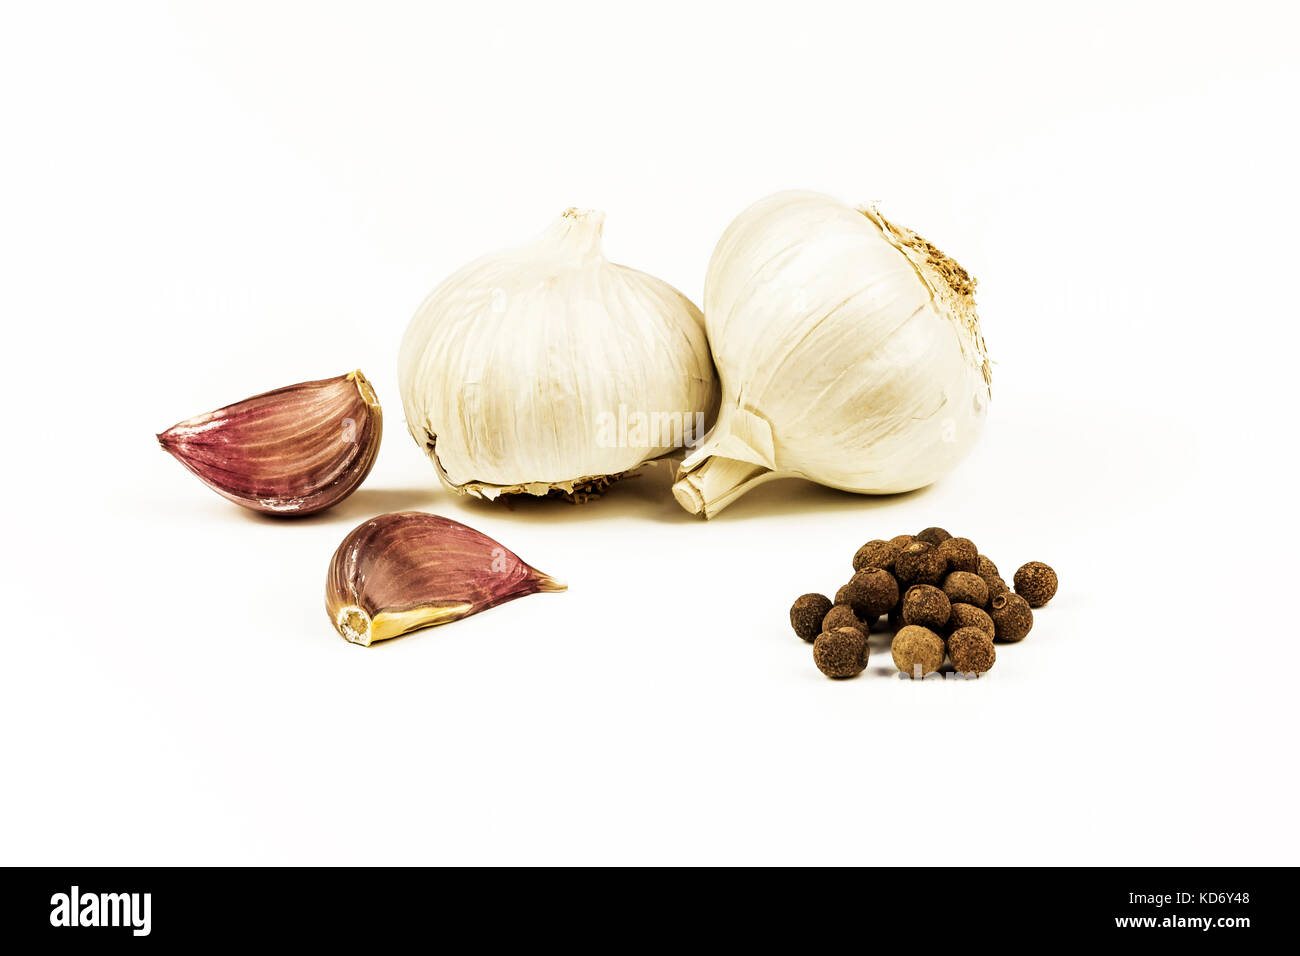 On a white background lie heads and uncooked cloves of garlic with peppercorns Stock Photo